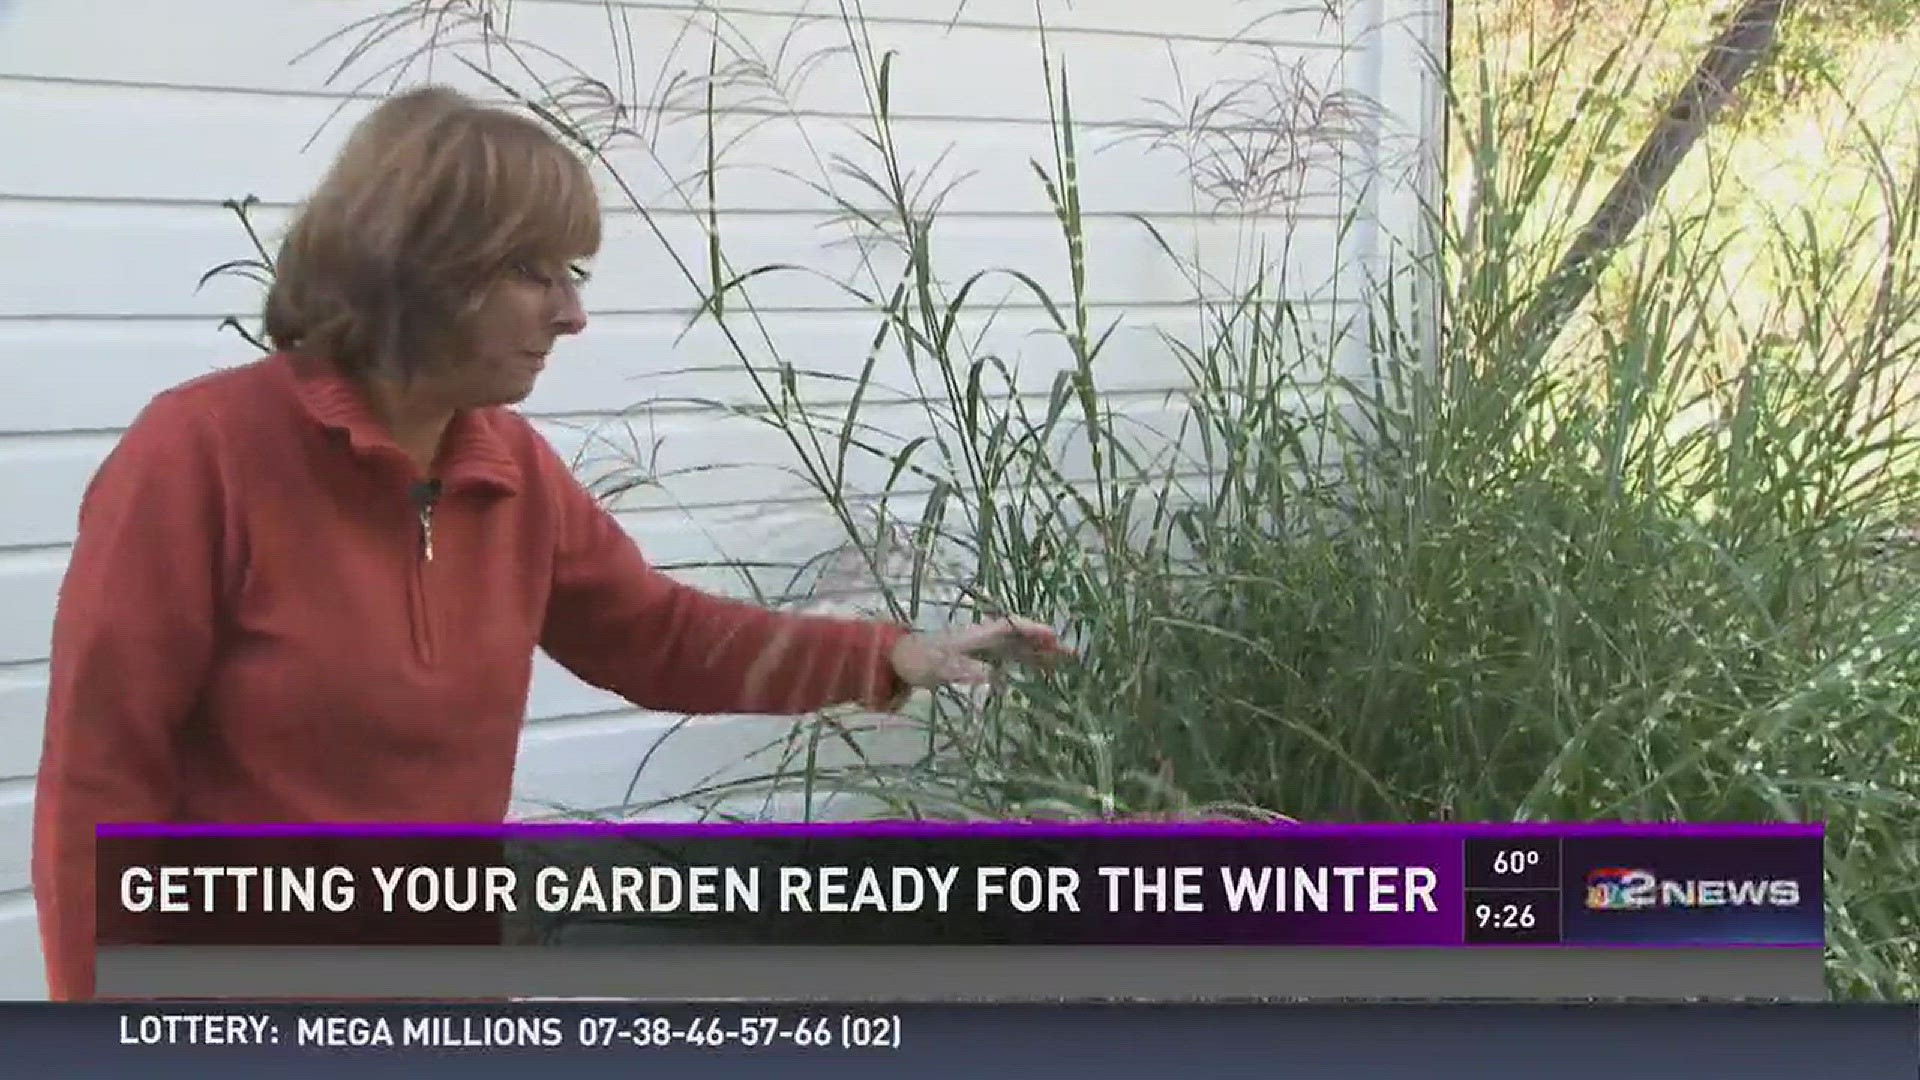 Gardening expert Jackie Albarella shows you how to trim back tall grasses to get your garden ready before winter hits.